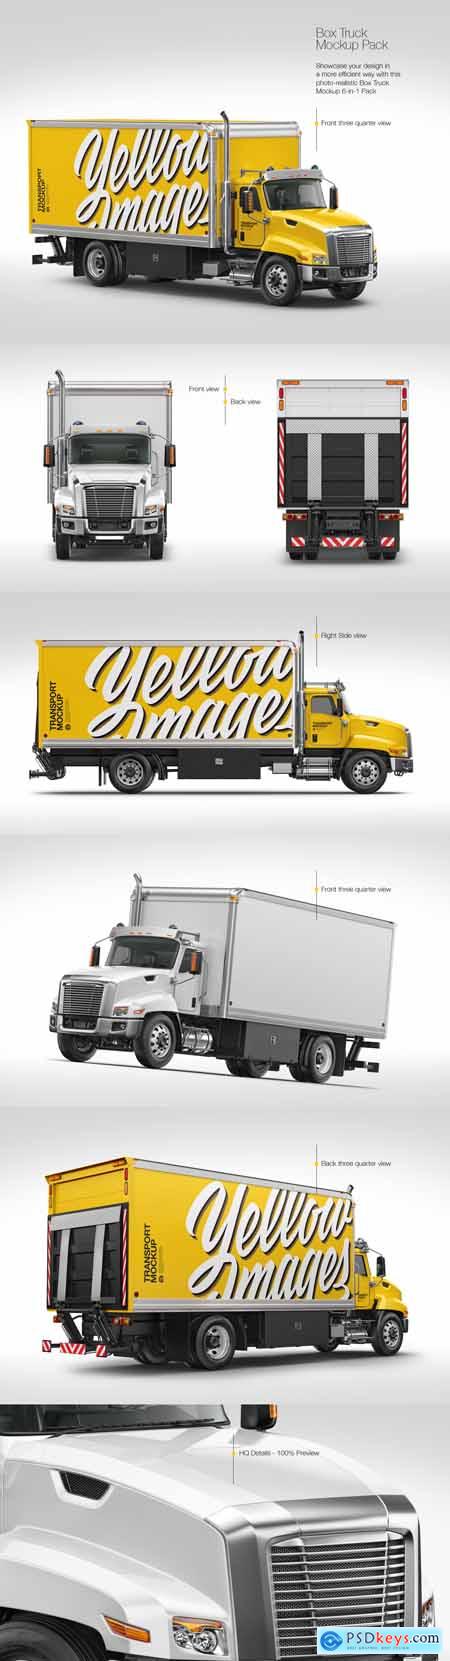 Download Box Truck Mockup Pack » Free Download Photoshop Vector Stock image Via Torrent Zippyshare From ...